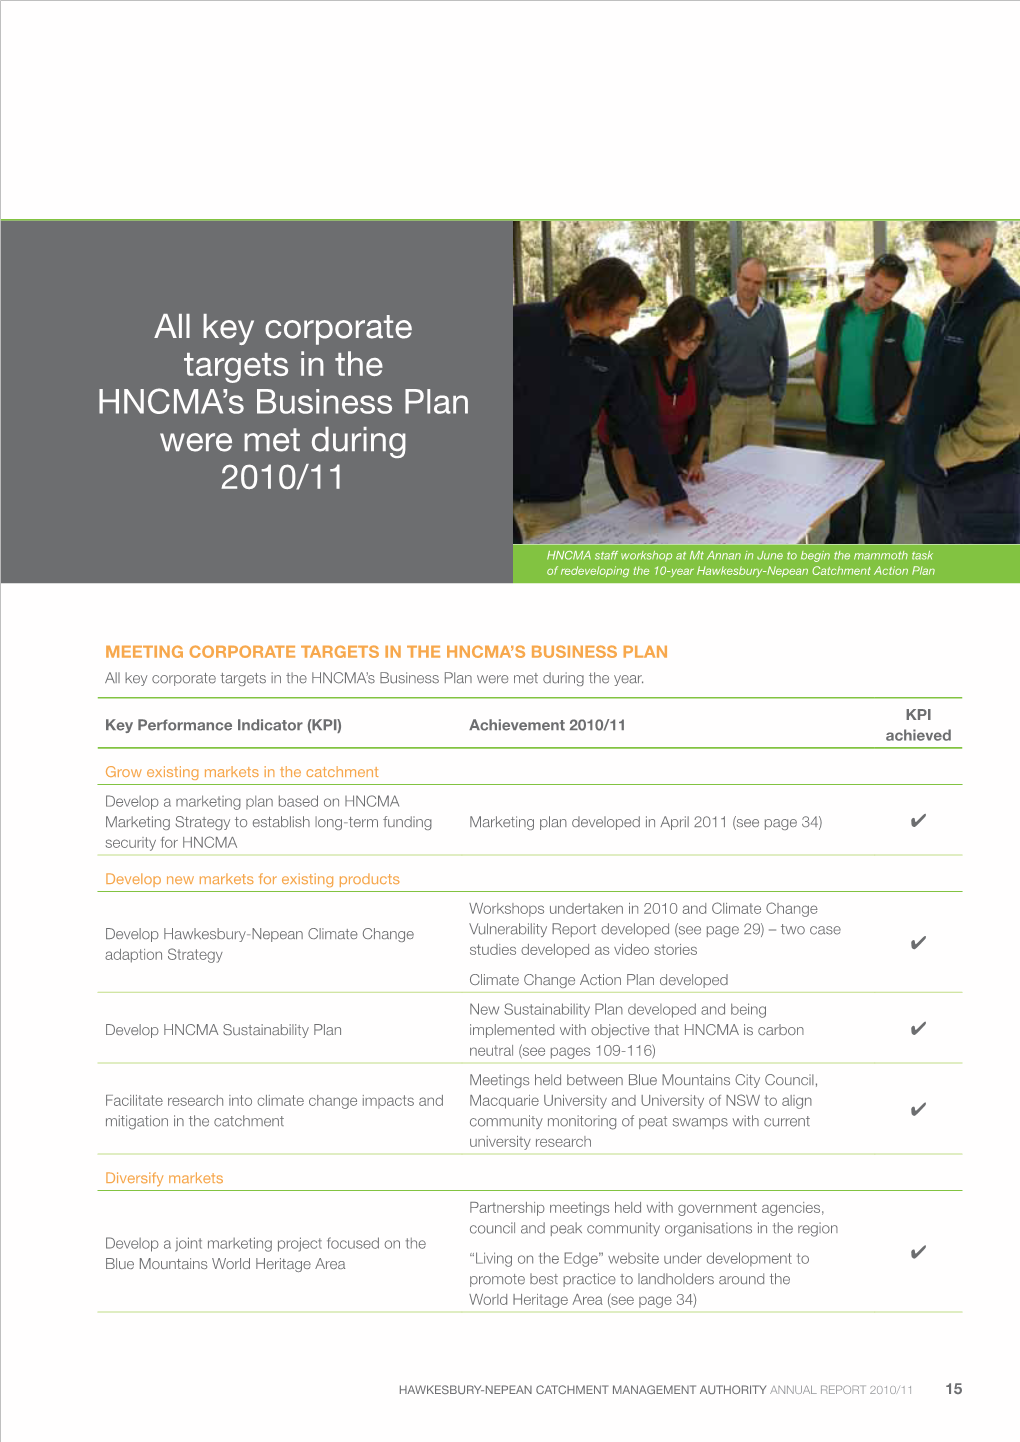 Key Corporate Targets in the Hncma's Business Plan Were Met During